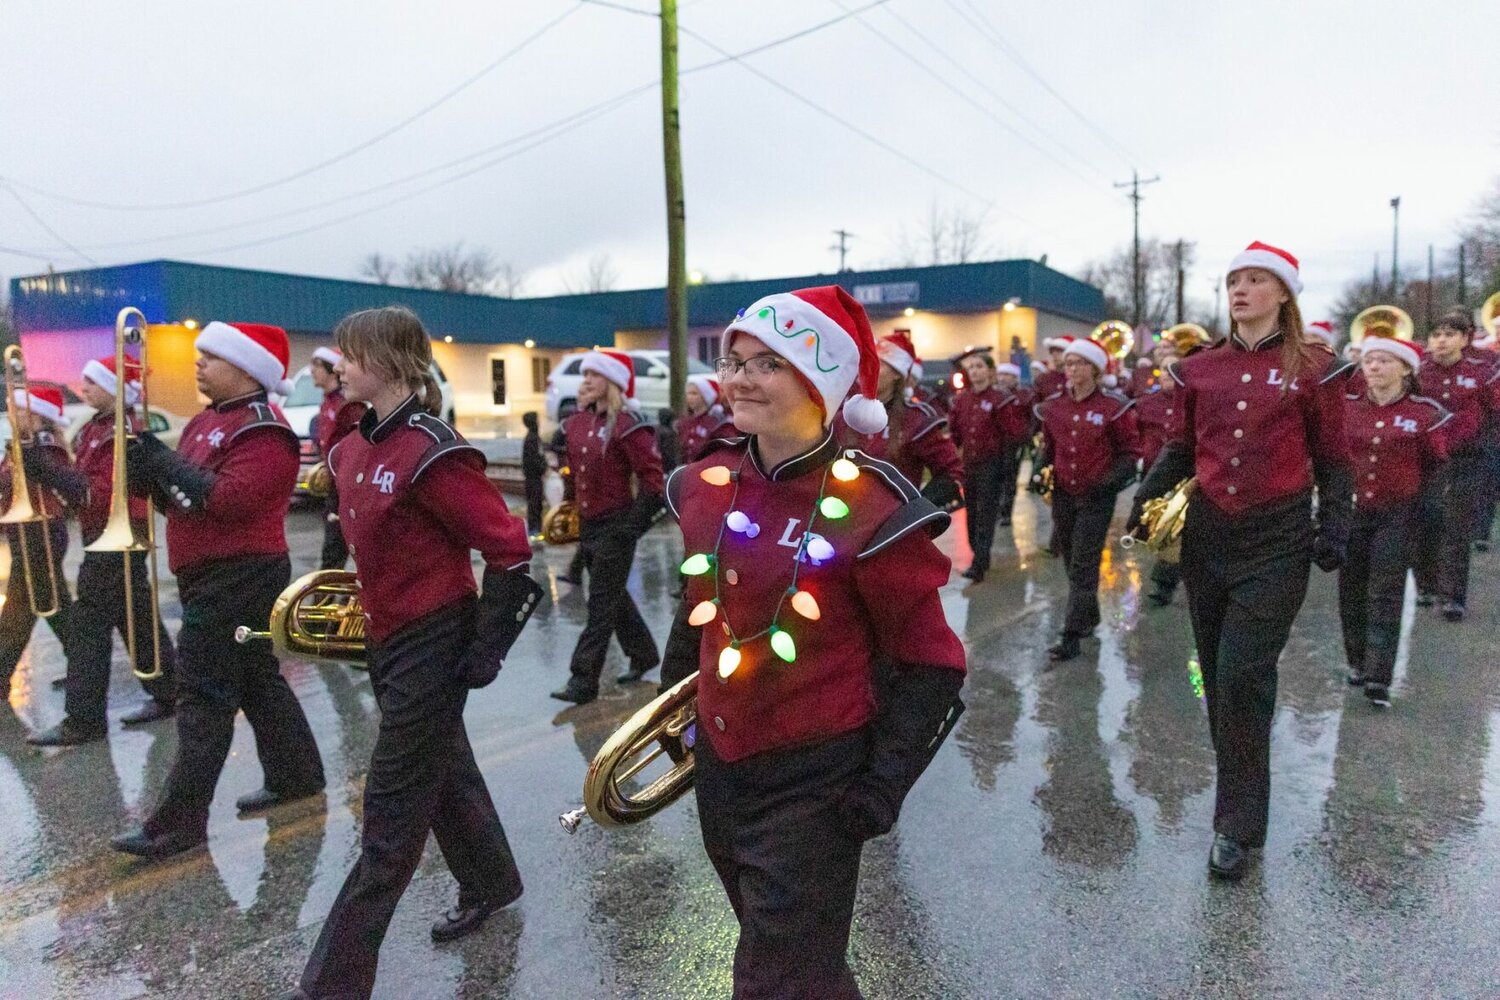 Pictured marching in the Rogersville Christmas Parade is the 2023 Class 4A Champion Band for the State of Missouri, the Logan-Rogersville High School Wildcat Band. Later that evening, they gifted the crowd with a live performance at the Tree-Lighting ceremony.